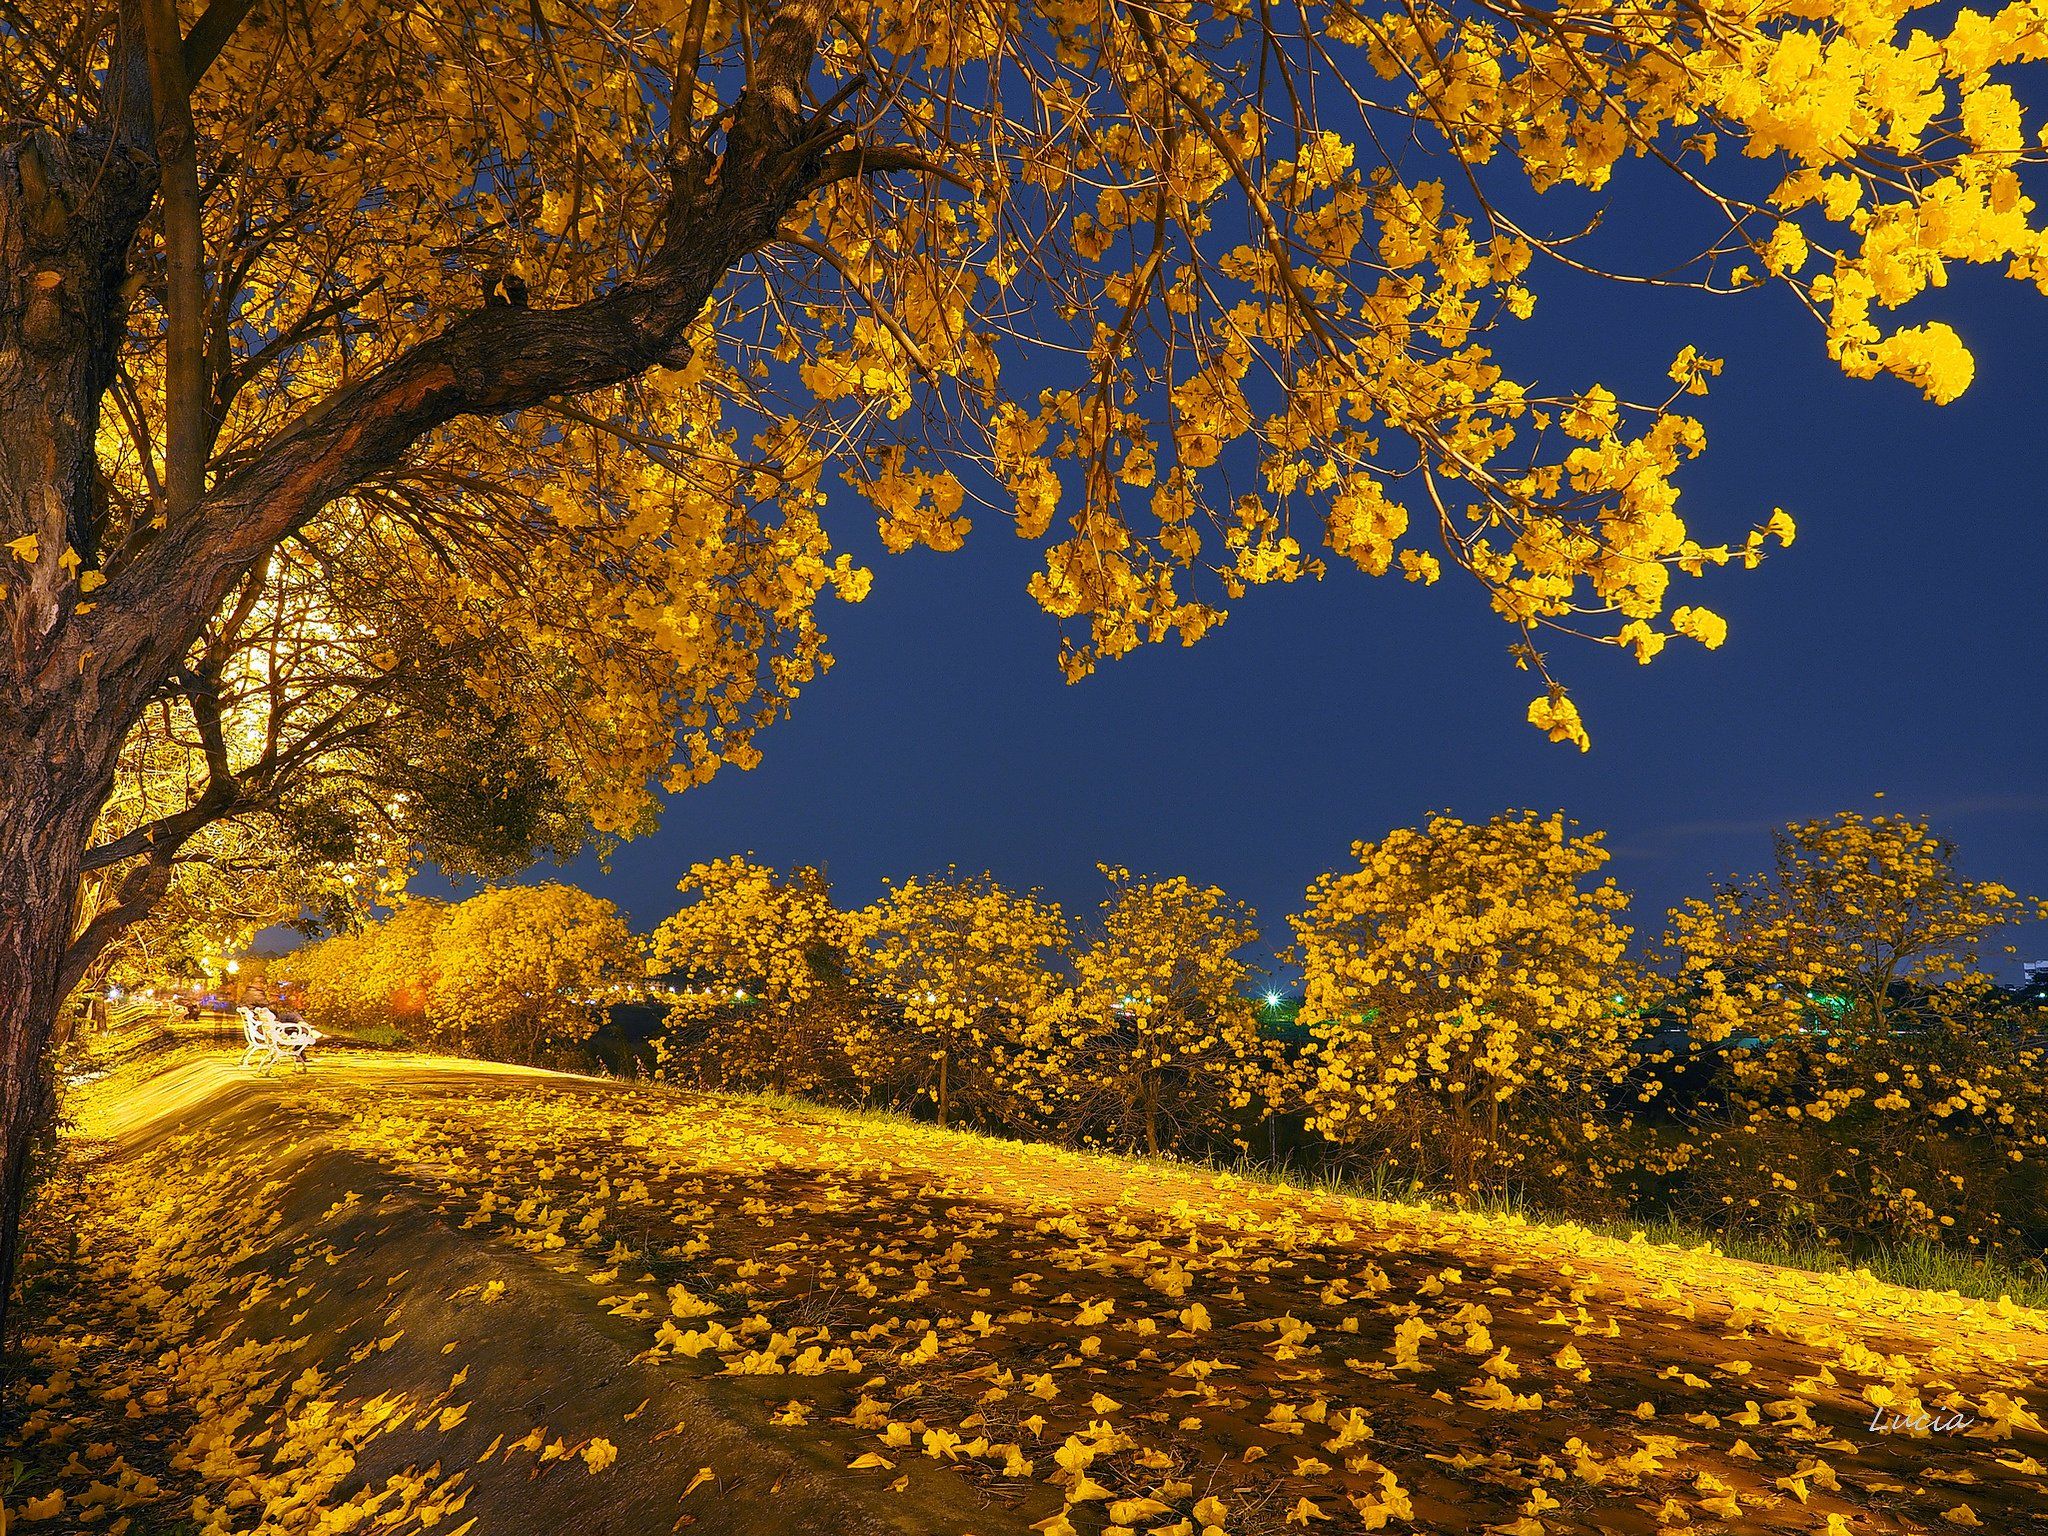 nature, Autumn, Beauty, Blue, Sky, Fall, Falling, Landscape, Leaves, Night, Park, Road, Romantic, Tonight, Tree, Trees, Yellow, Trees Wallpaper HD / Desktop and Mobile Background